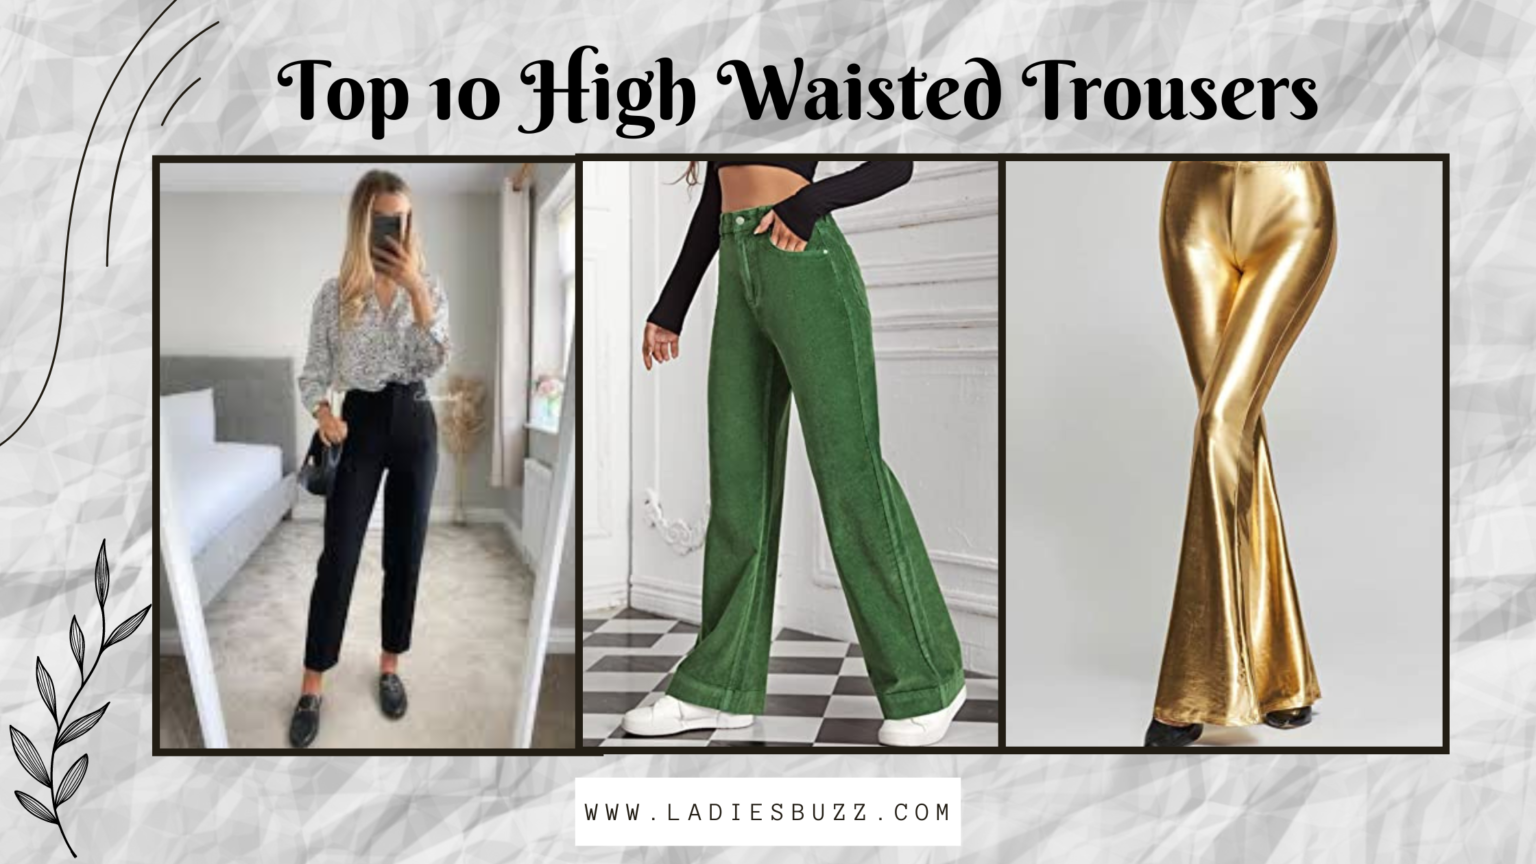 top 10 high waisted trousers for women